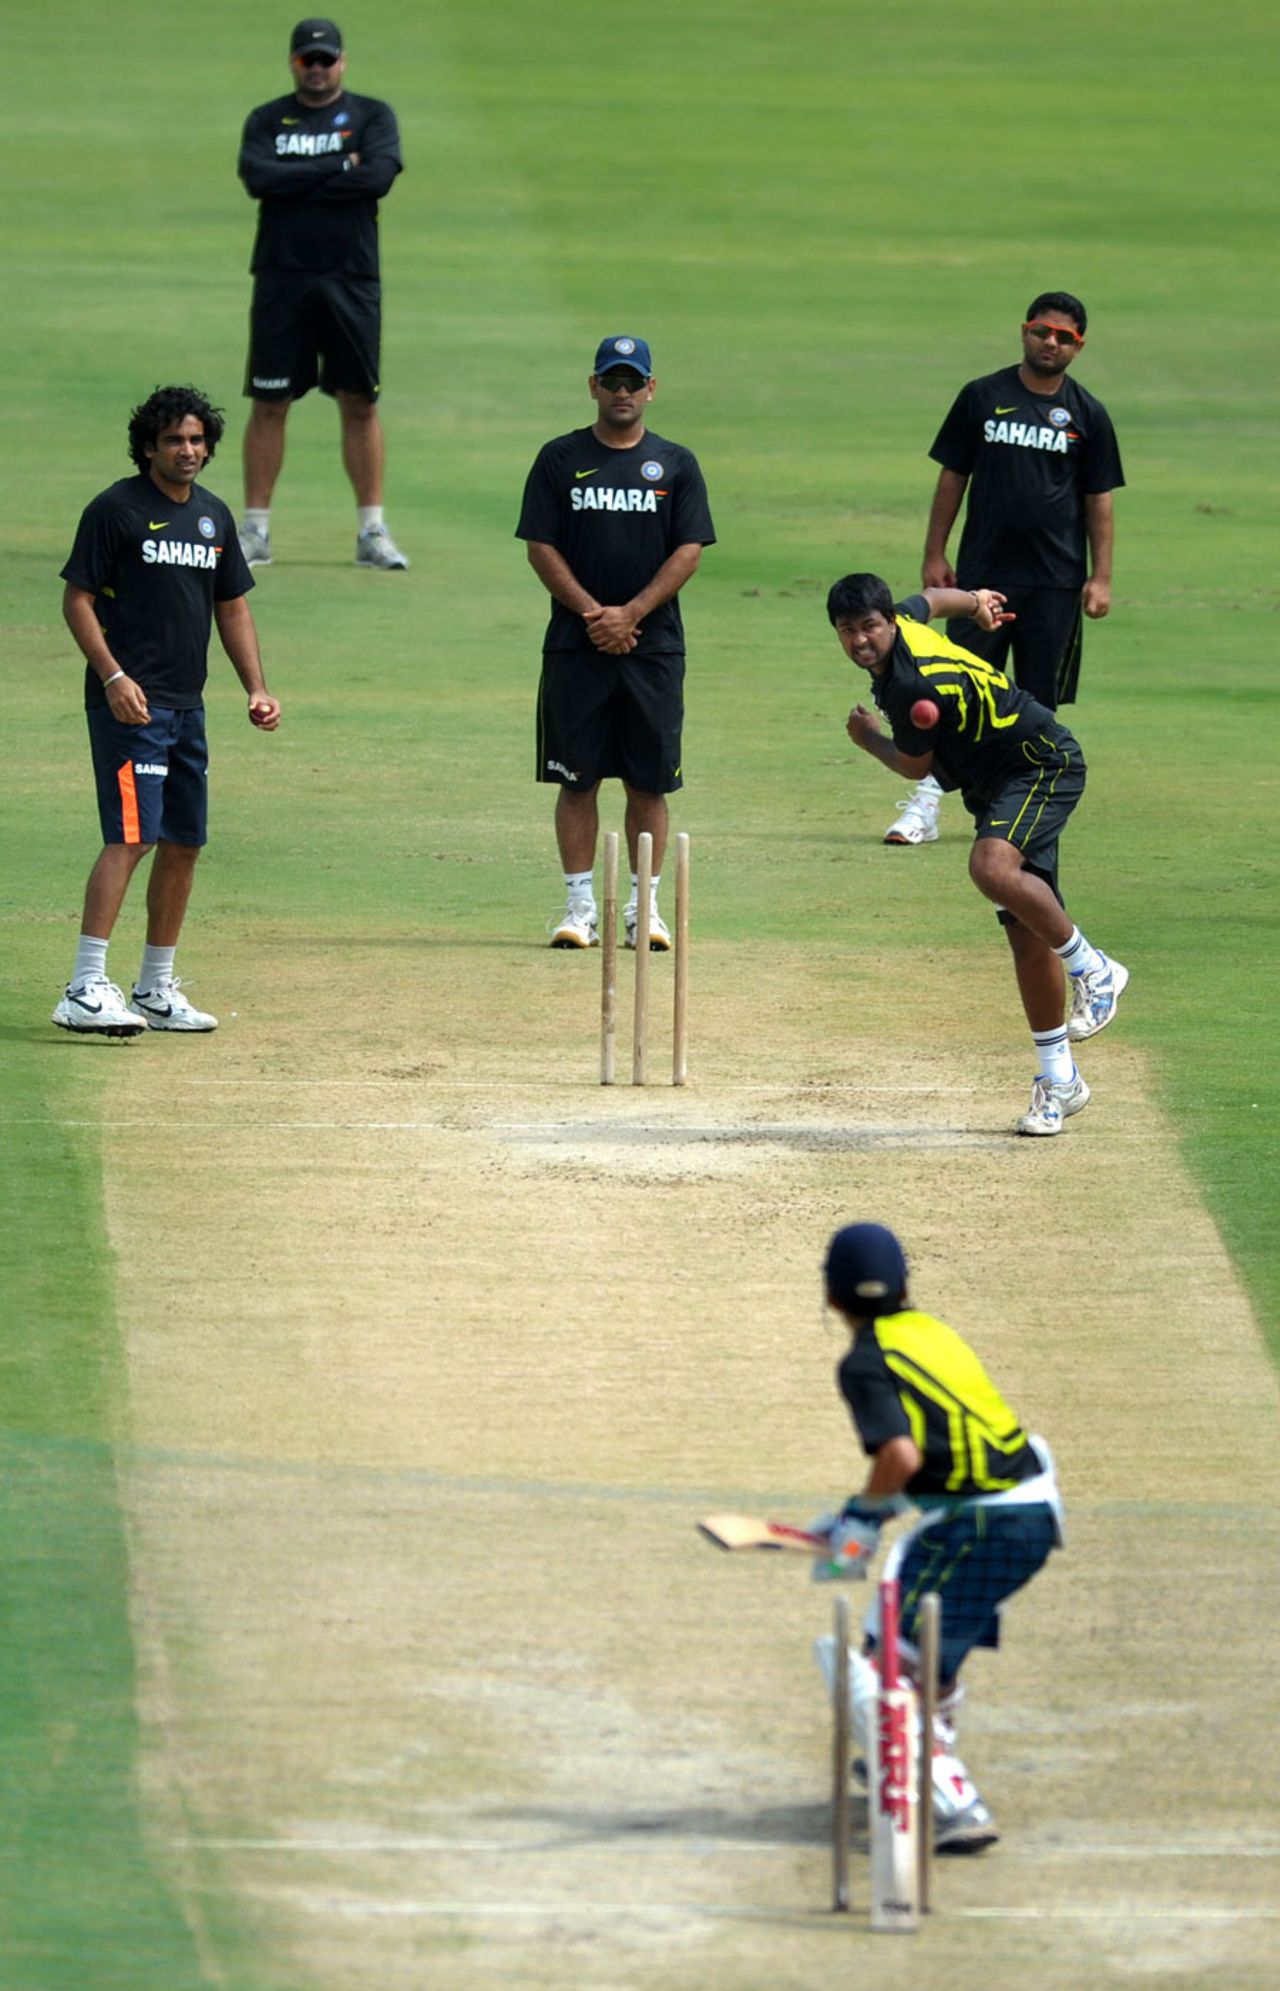 Pragyan Ojha has a bowl, watched by his team-mates, Hyderabad, August 22, 2012